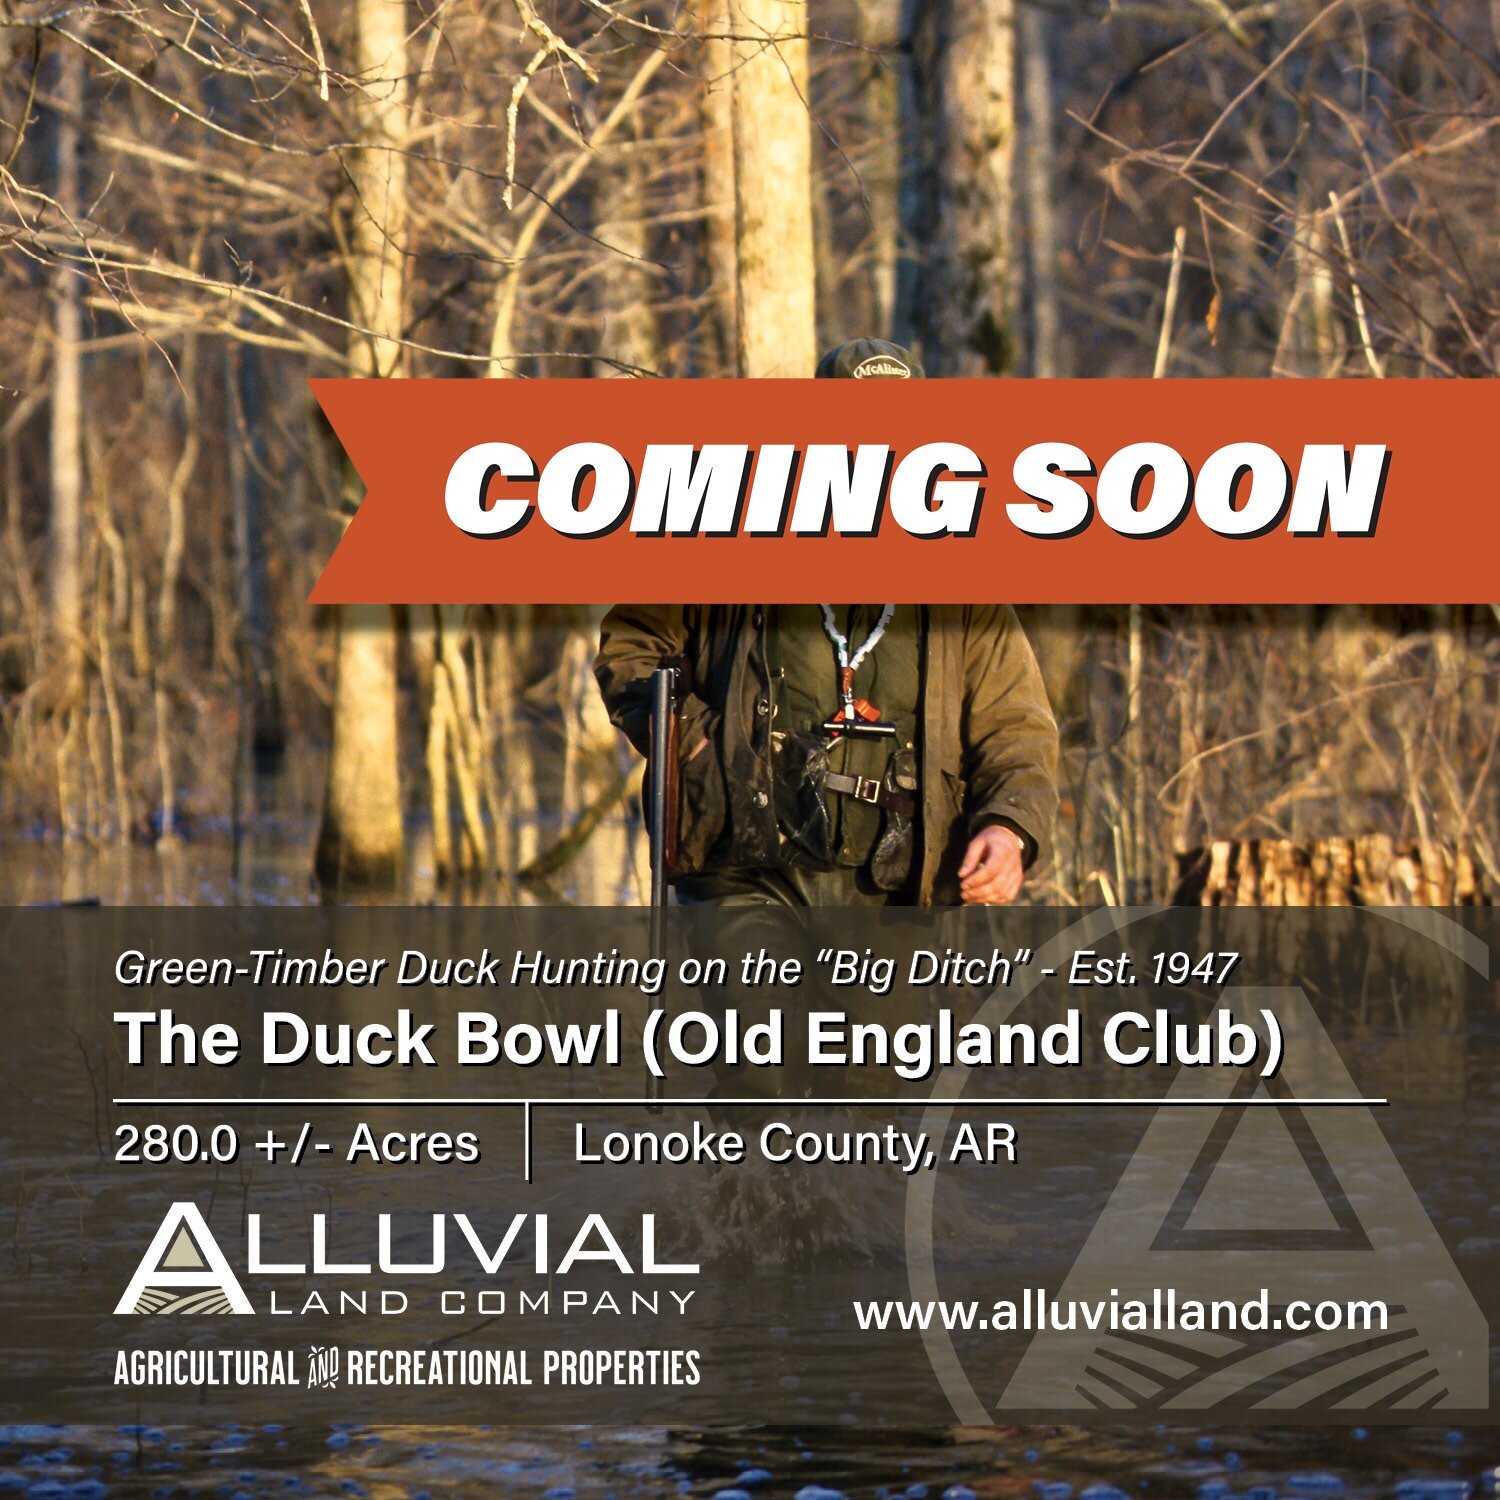 COMING SOON
The Duck Bowl (Old England Club) is a green-timber duck hunting property established in 1947. The land is 280 +/- acres positioned on the &ldquo;Big Ditch&rdquo; in Lonoke County just west of Stuttgart, Arkansas. Contact us to learn more.